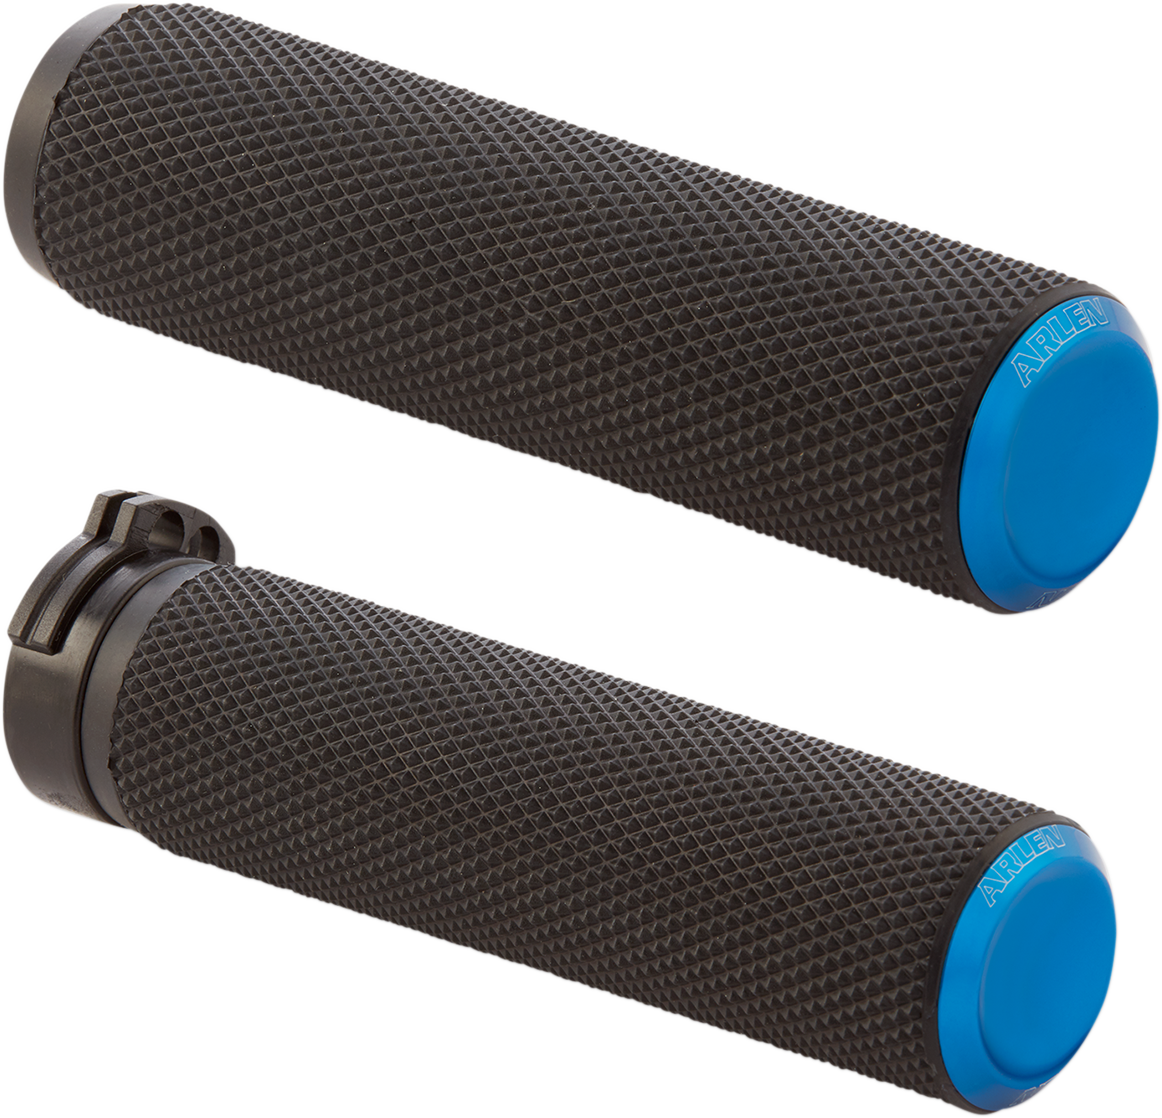 ARLEN NESS Grips - Knurled - Cable - Blue 07-335